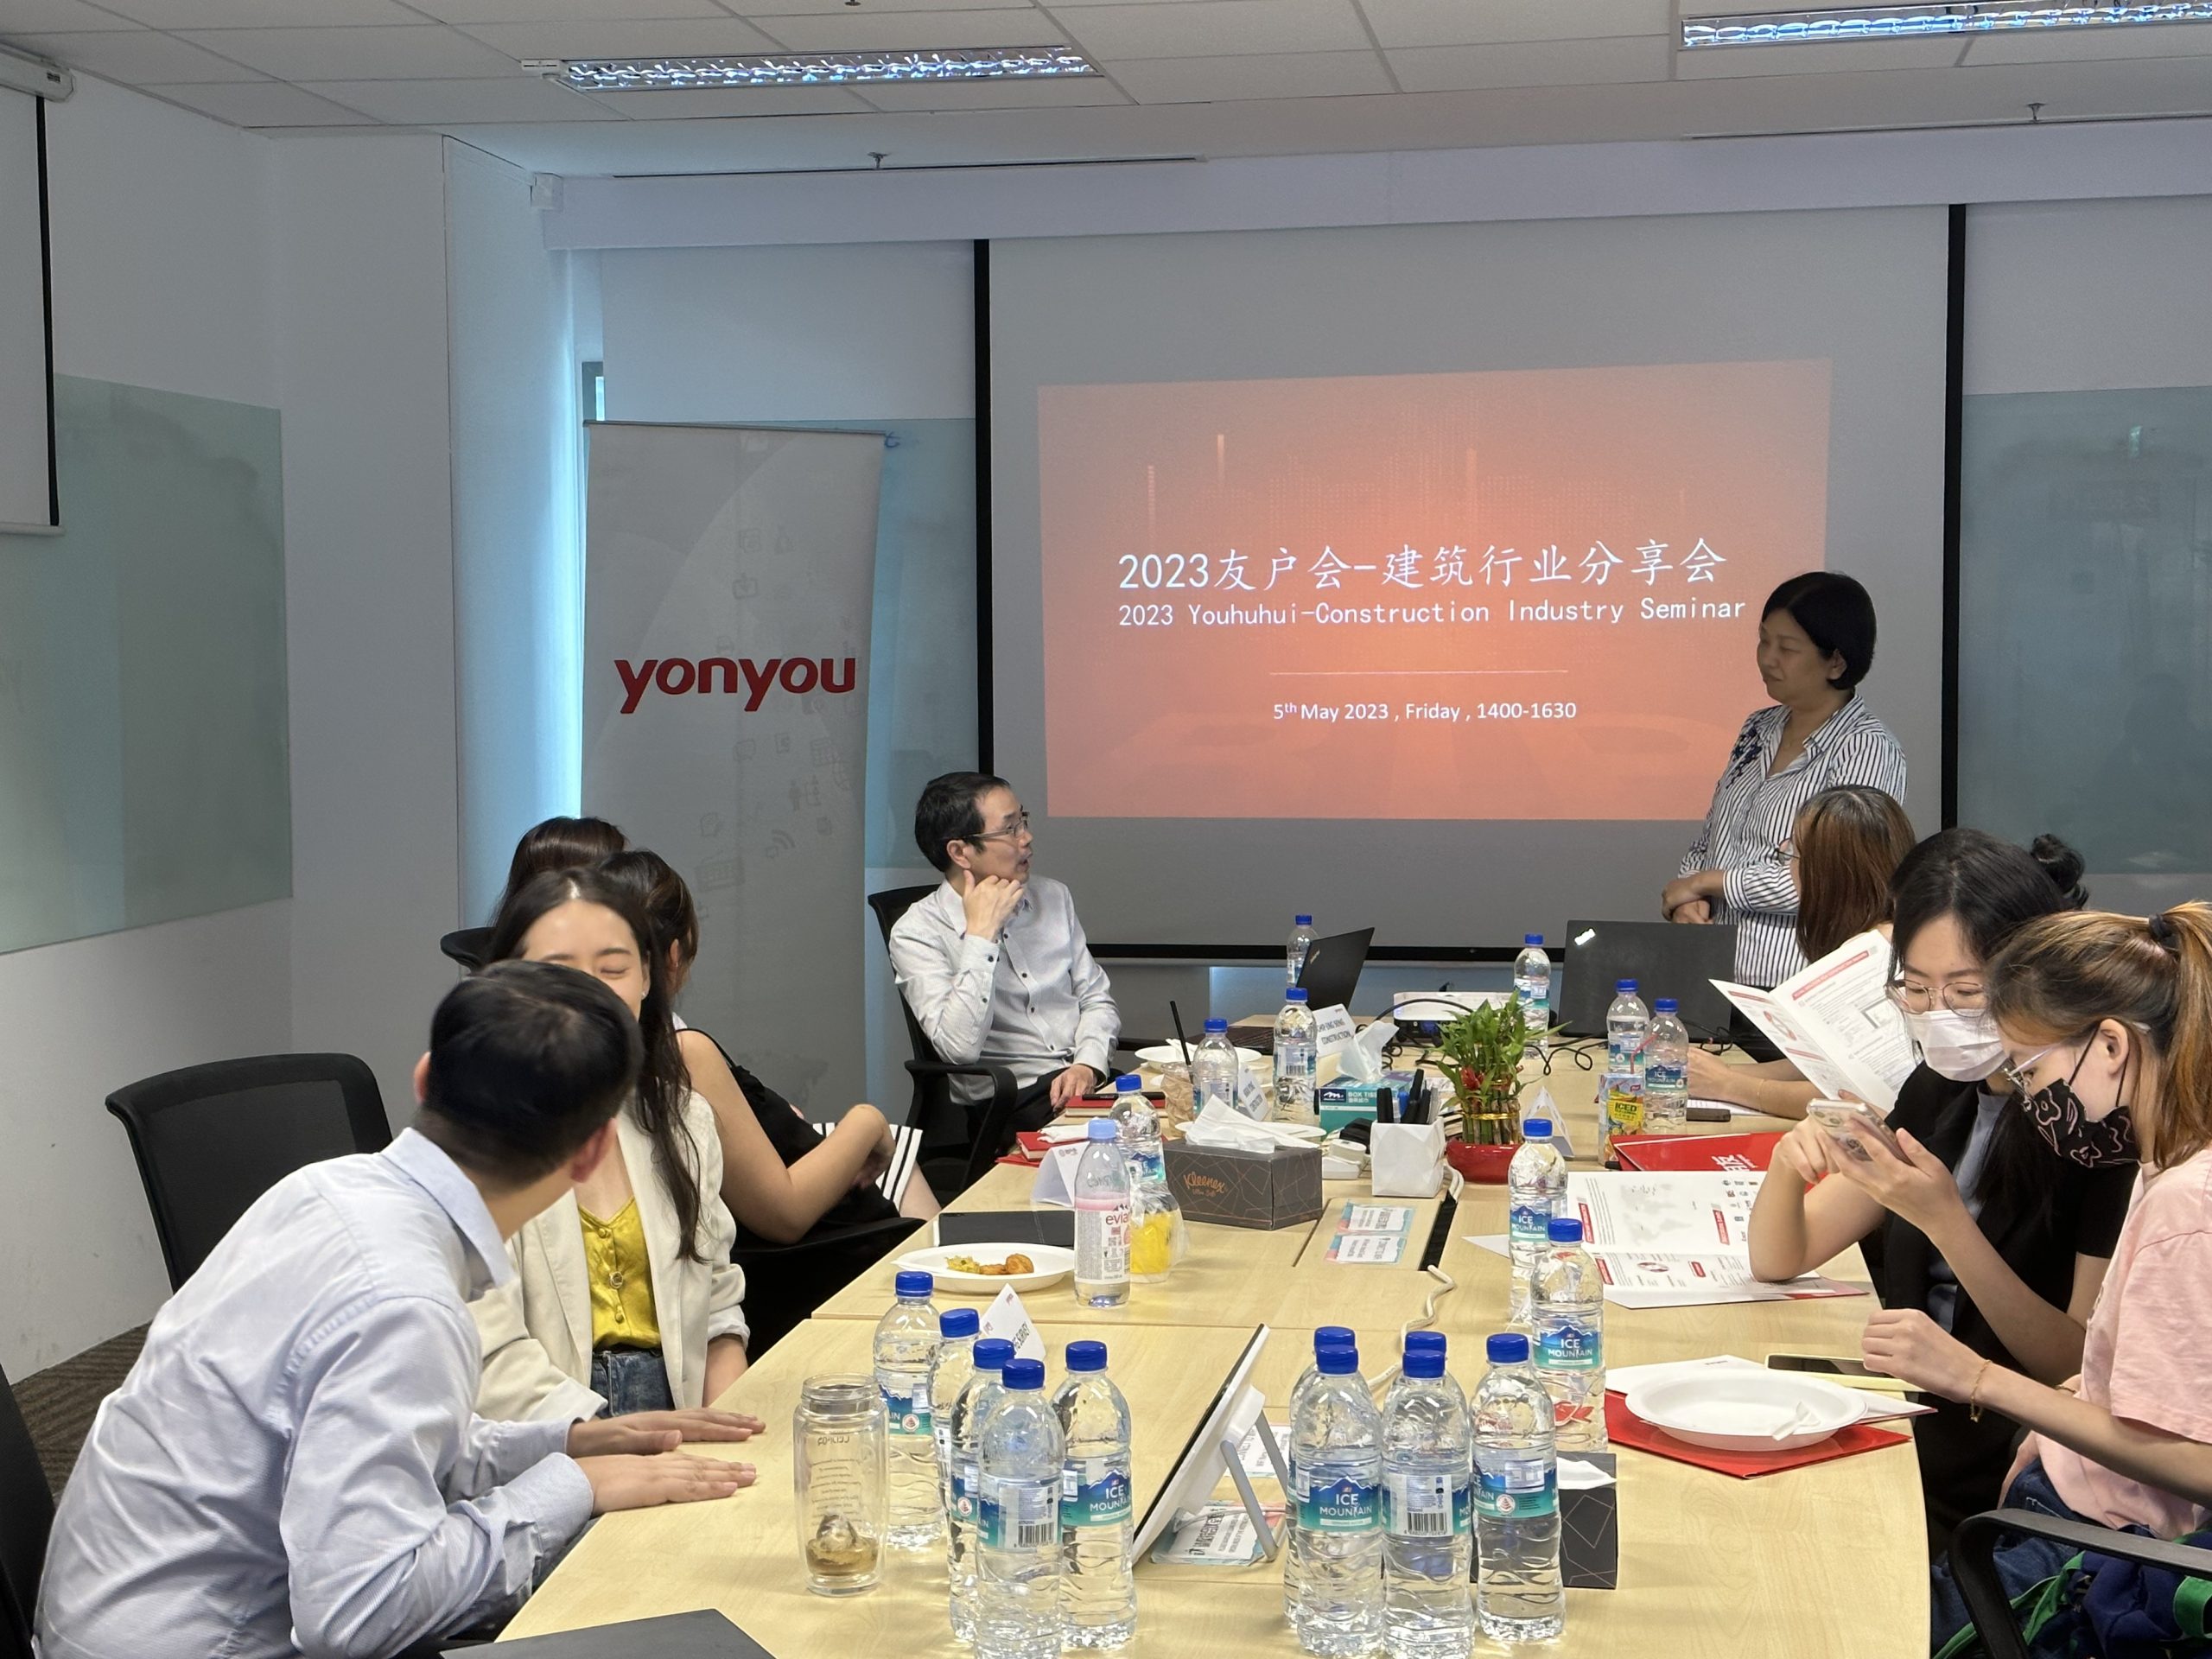 2023 Youhuhui——Construction Industry Seminar was Successfully Held